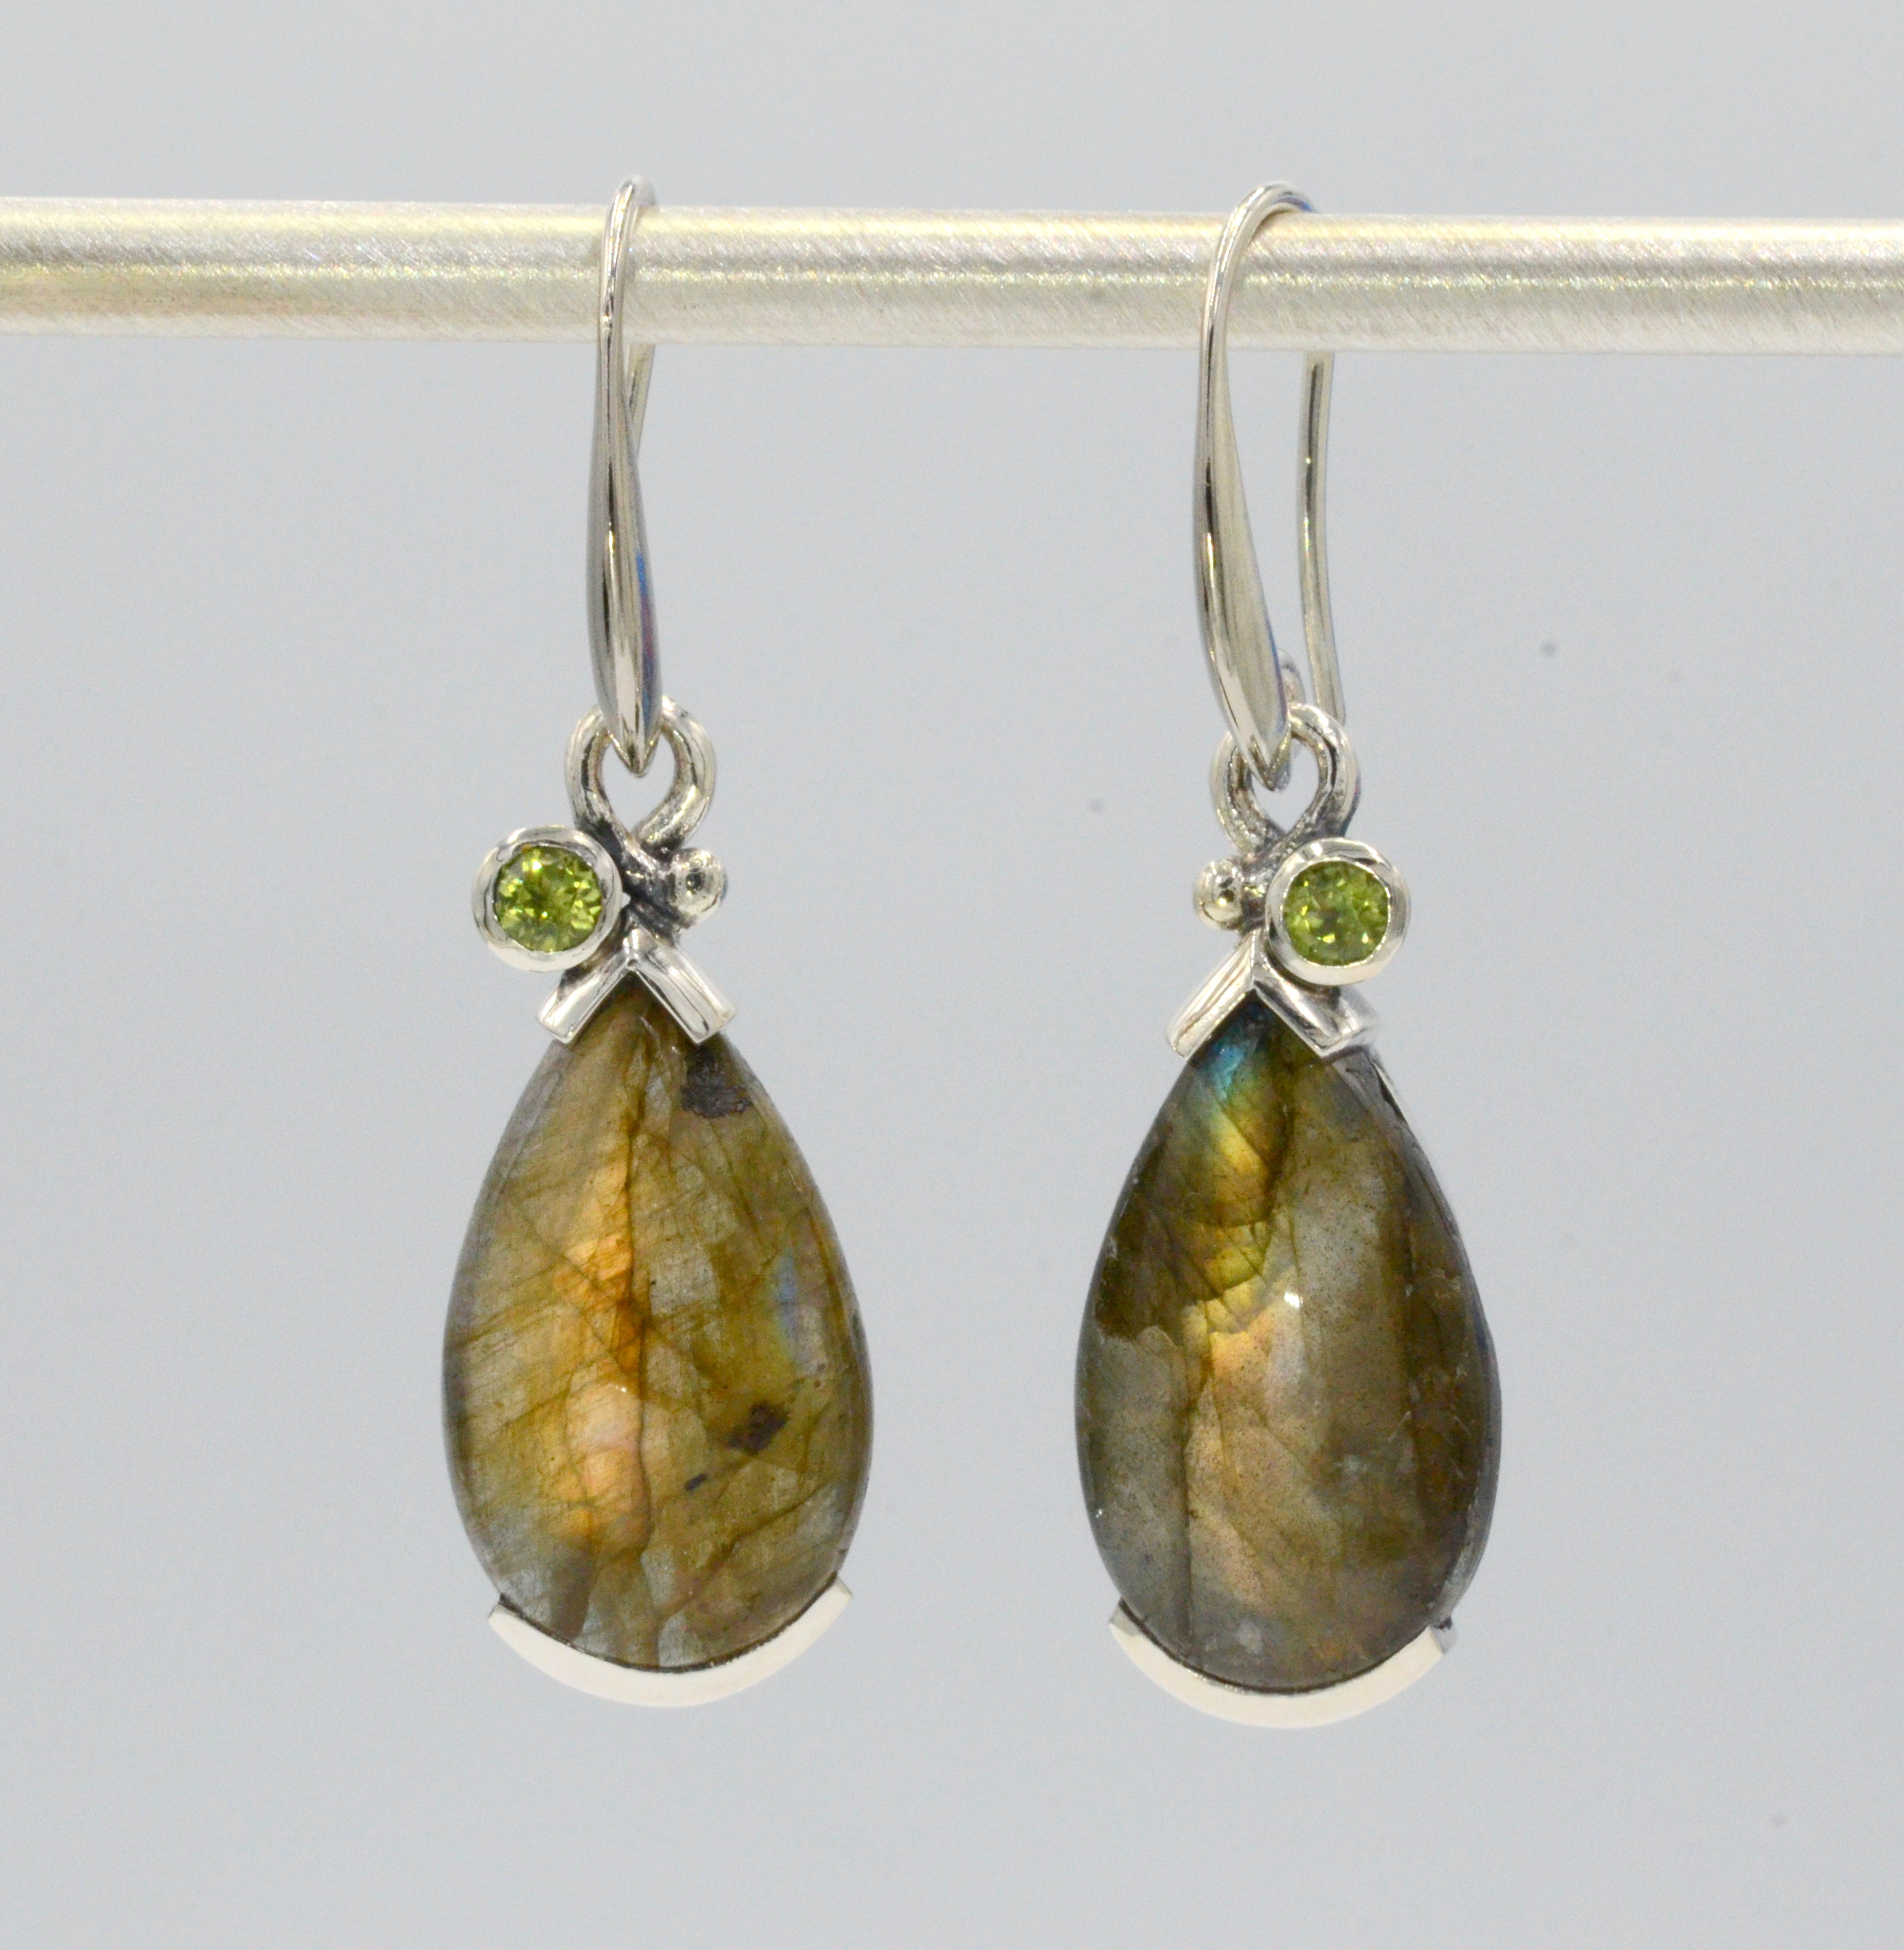 Beautiful multi color Labradorites and Peridot Euro Charms. Earrings come with Sterling Silver French wires and can also be worn with our Euro Wires. Go to "About Store" for more information in regard to our Euro Wires.